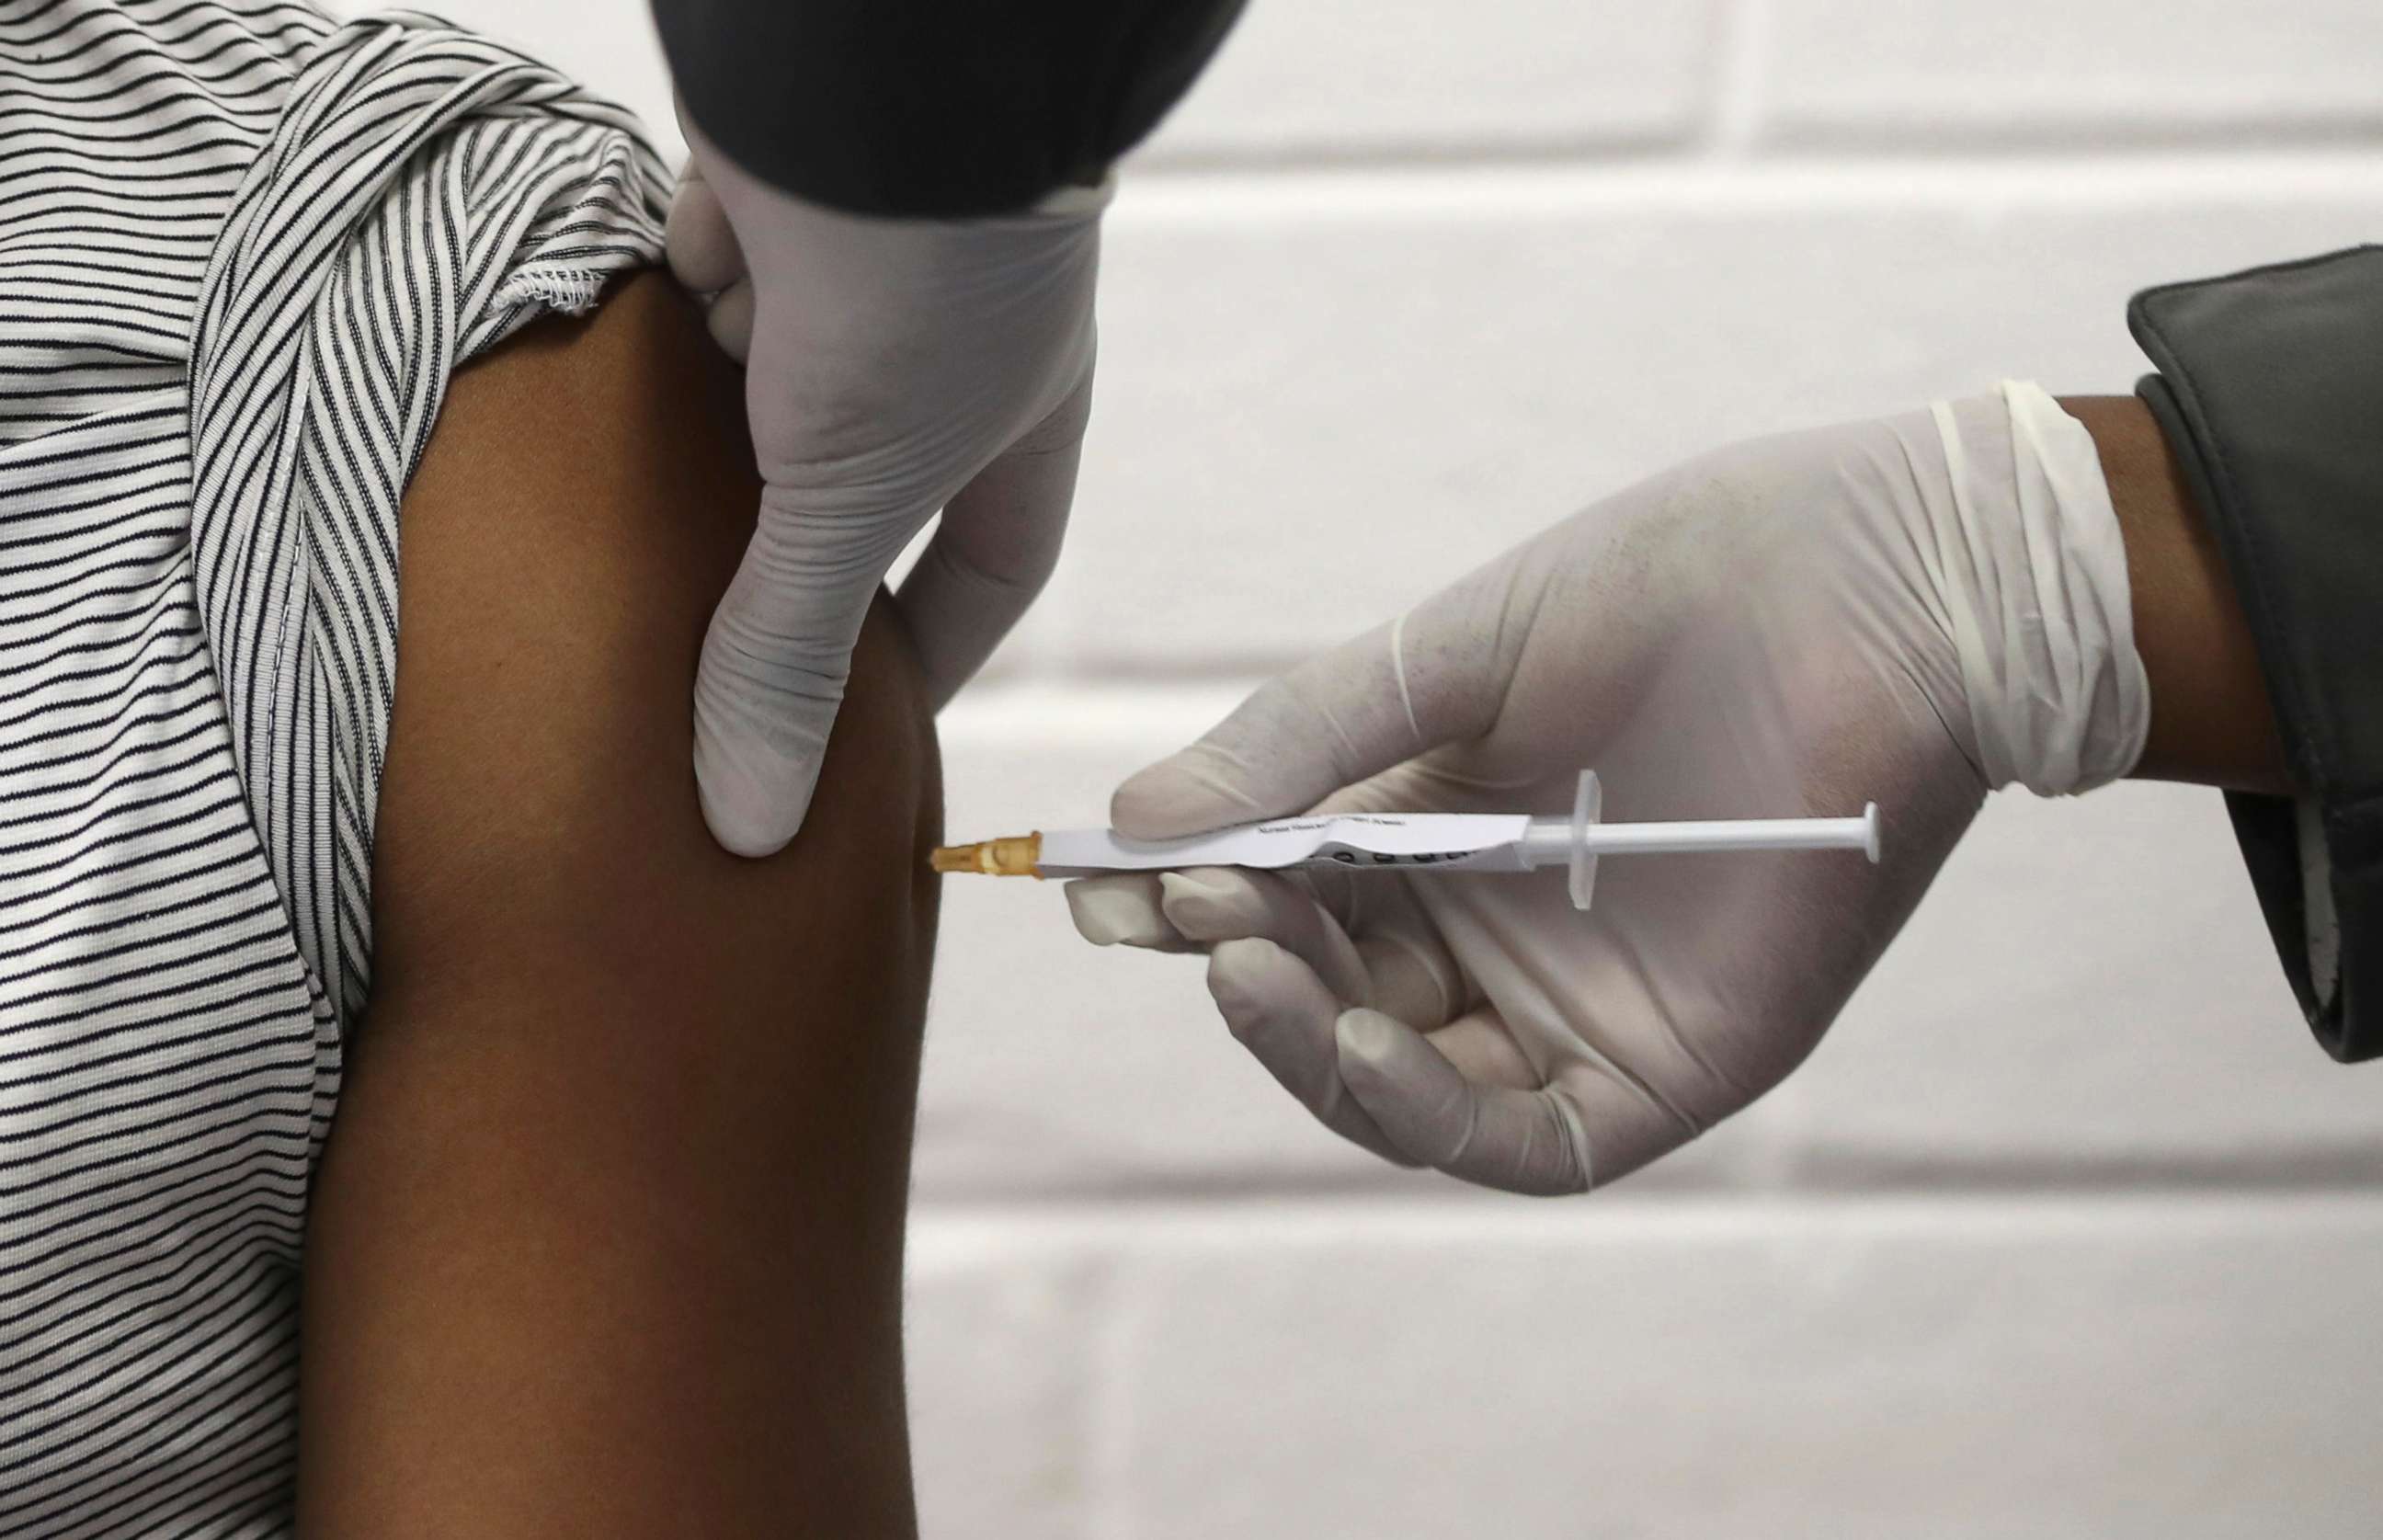 PHOTO: A volunteer receives an injection at the Chris Hani Baragwanath Hospital in Johannesburg, South Africa, on June 24, 2020, as part of Africa's first participation in the AstraZeneca/Oxford COVID-19 vaccine trial.